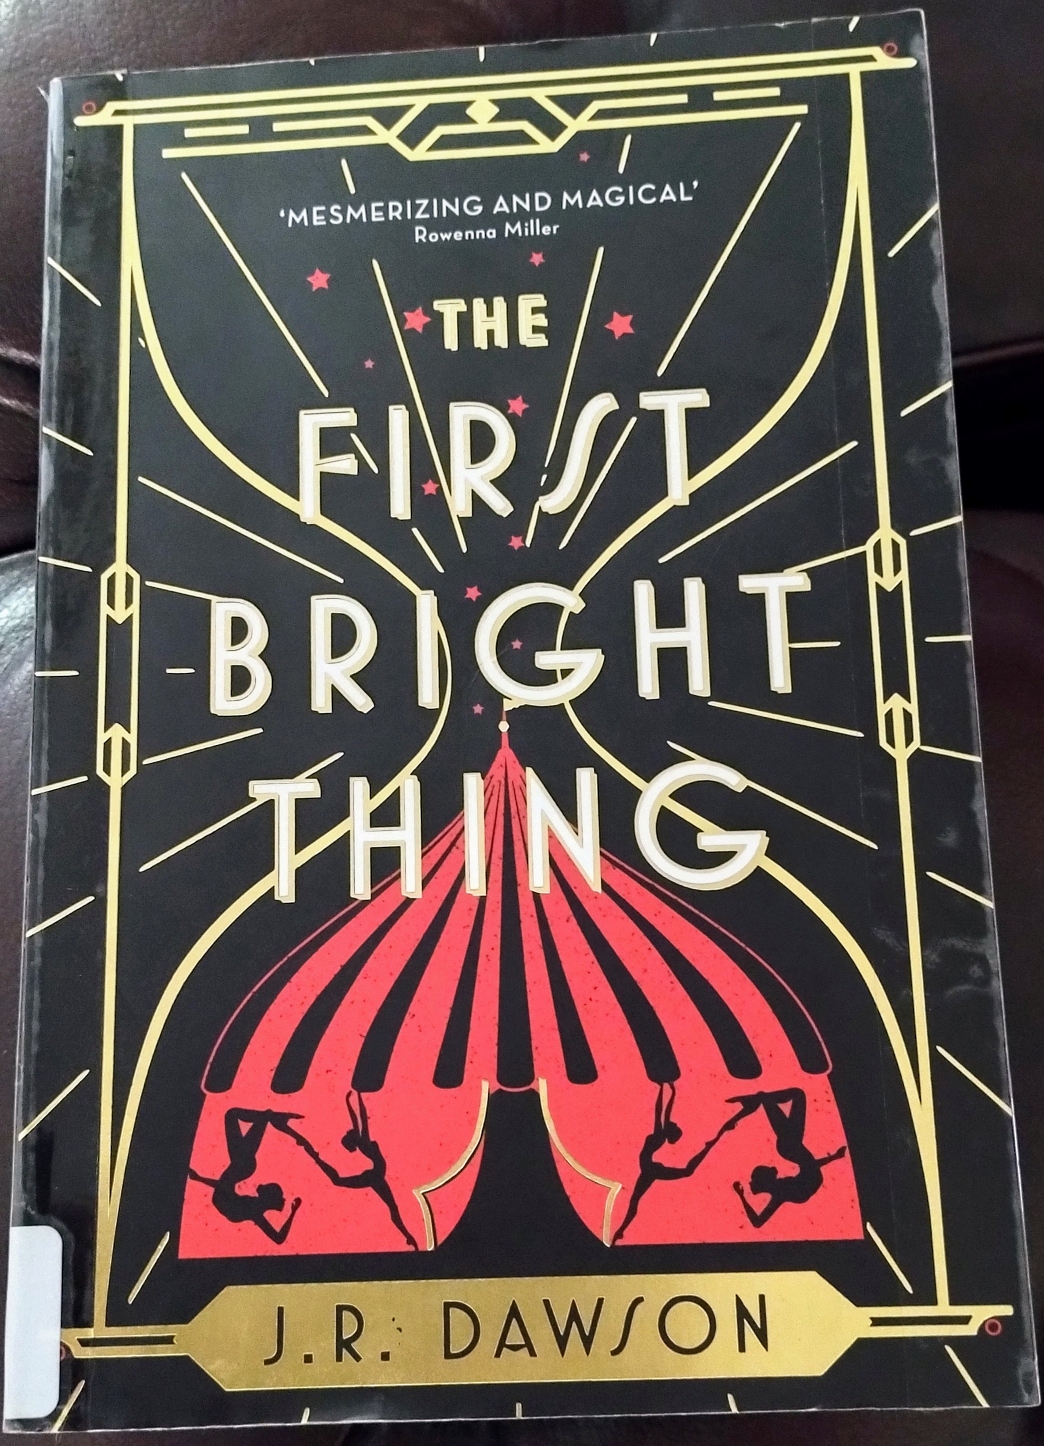 The First Bright Thing features a Spark in a dark world